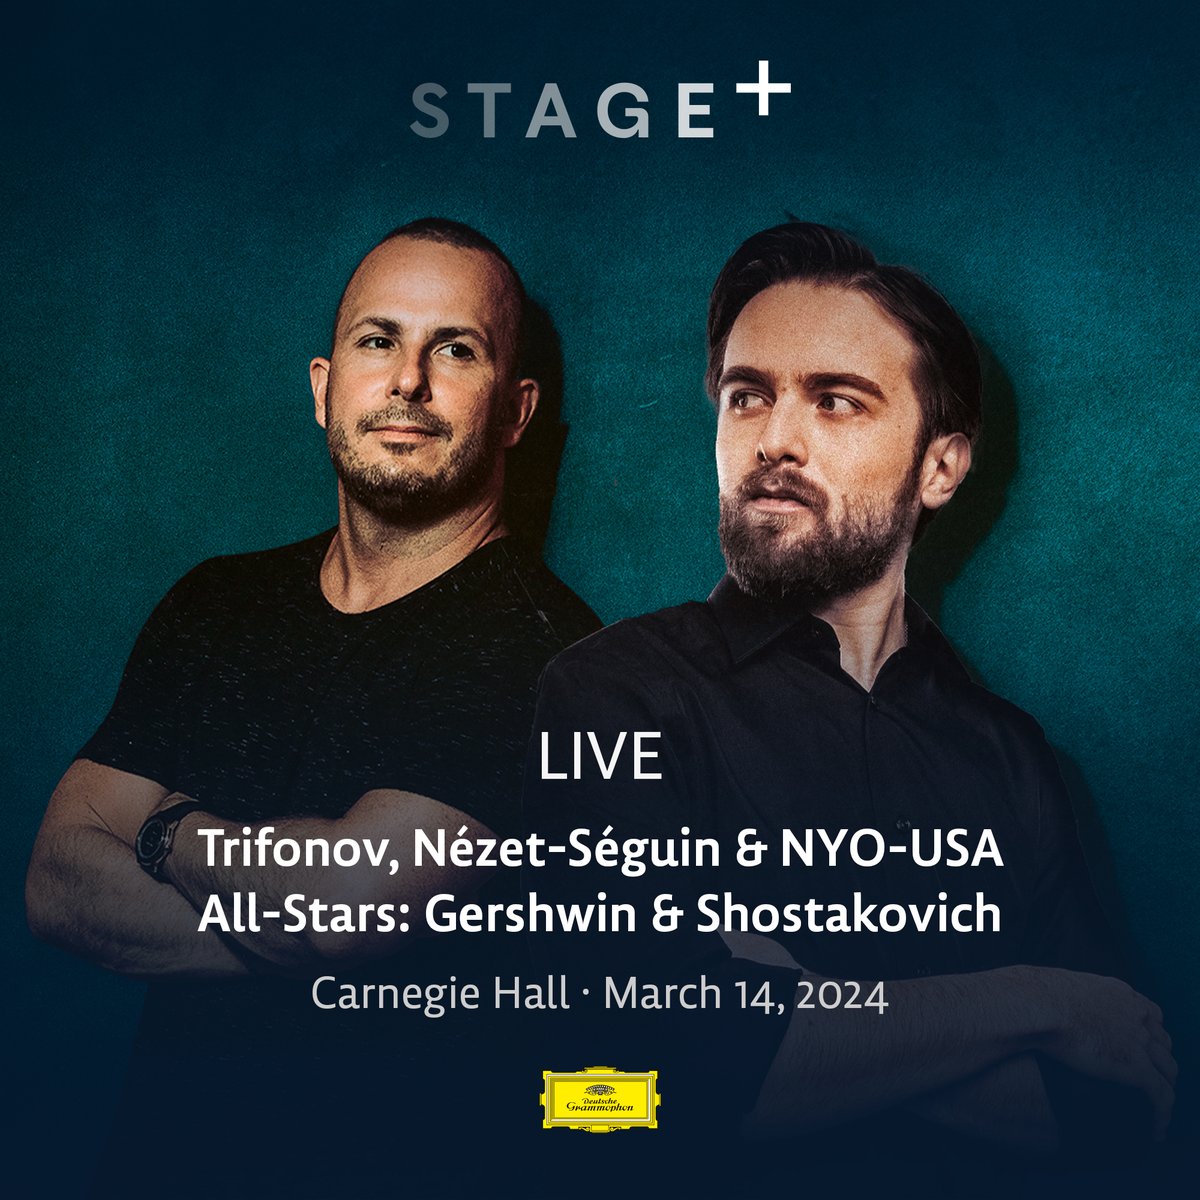 Tune in to @stageplusmusic on March 14 and 15 for my performance with conductor Yannick @nezetseguin and the NYO USA / NYO2 All-Stars streaming live from @carnegiehall. ▶️ stage.plus/Carnegie